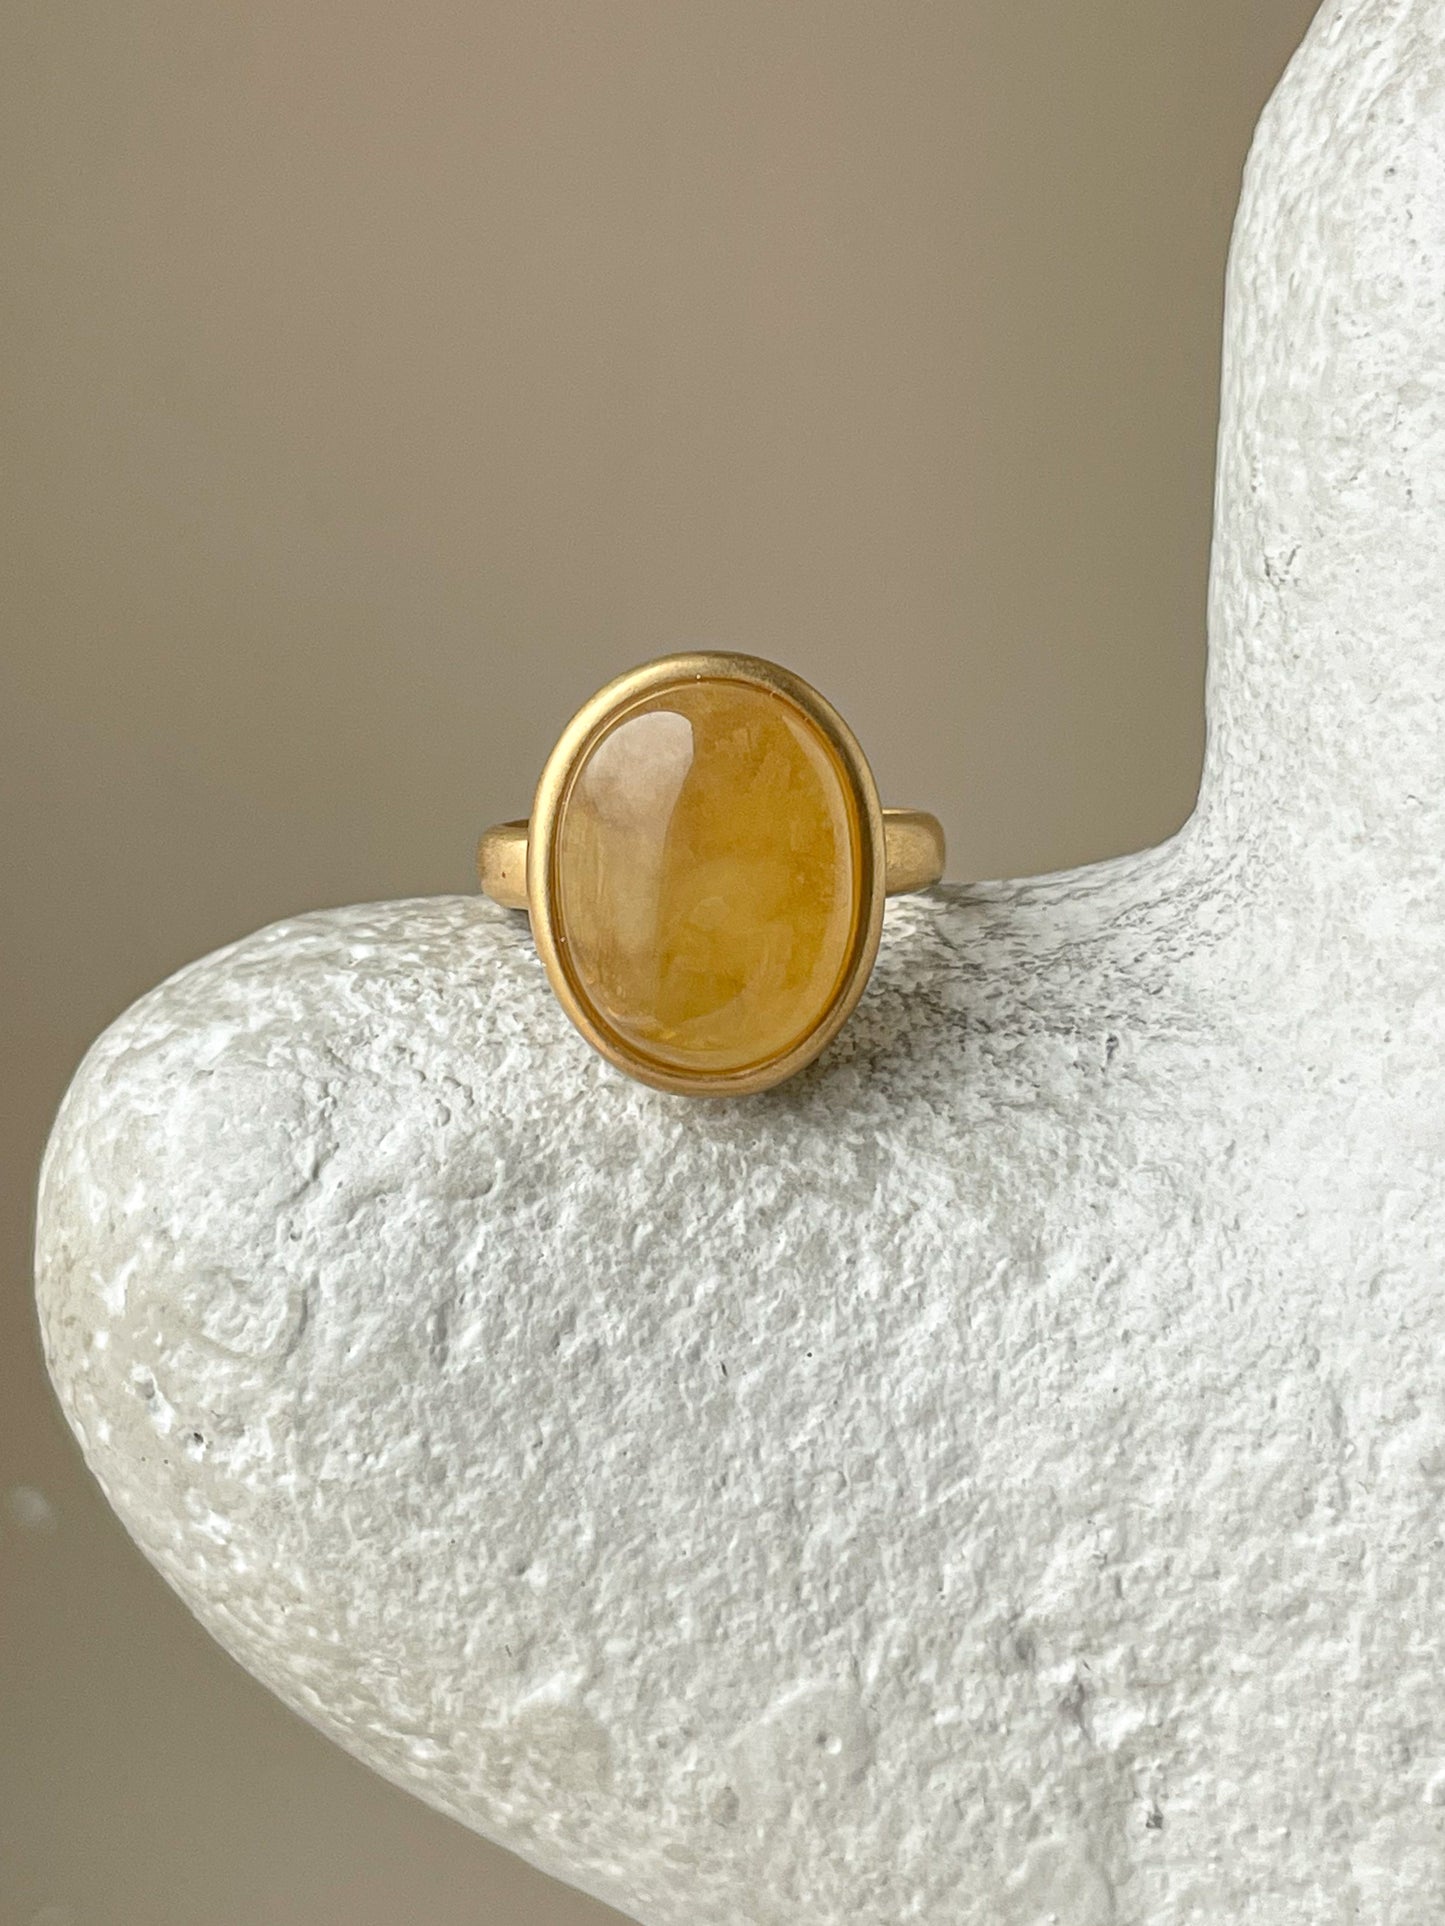 Honey amber ring - Gold plated silver - Large ring collection -Size 9